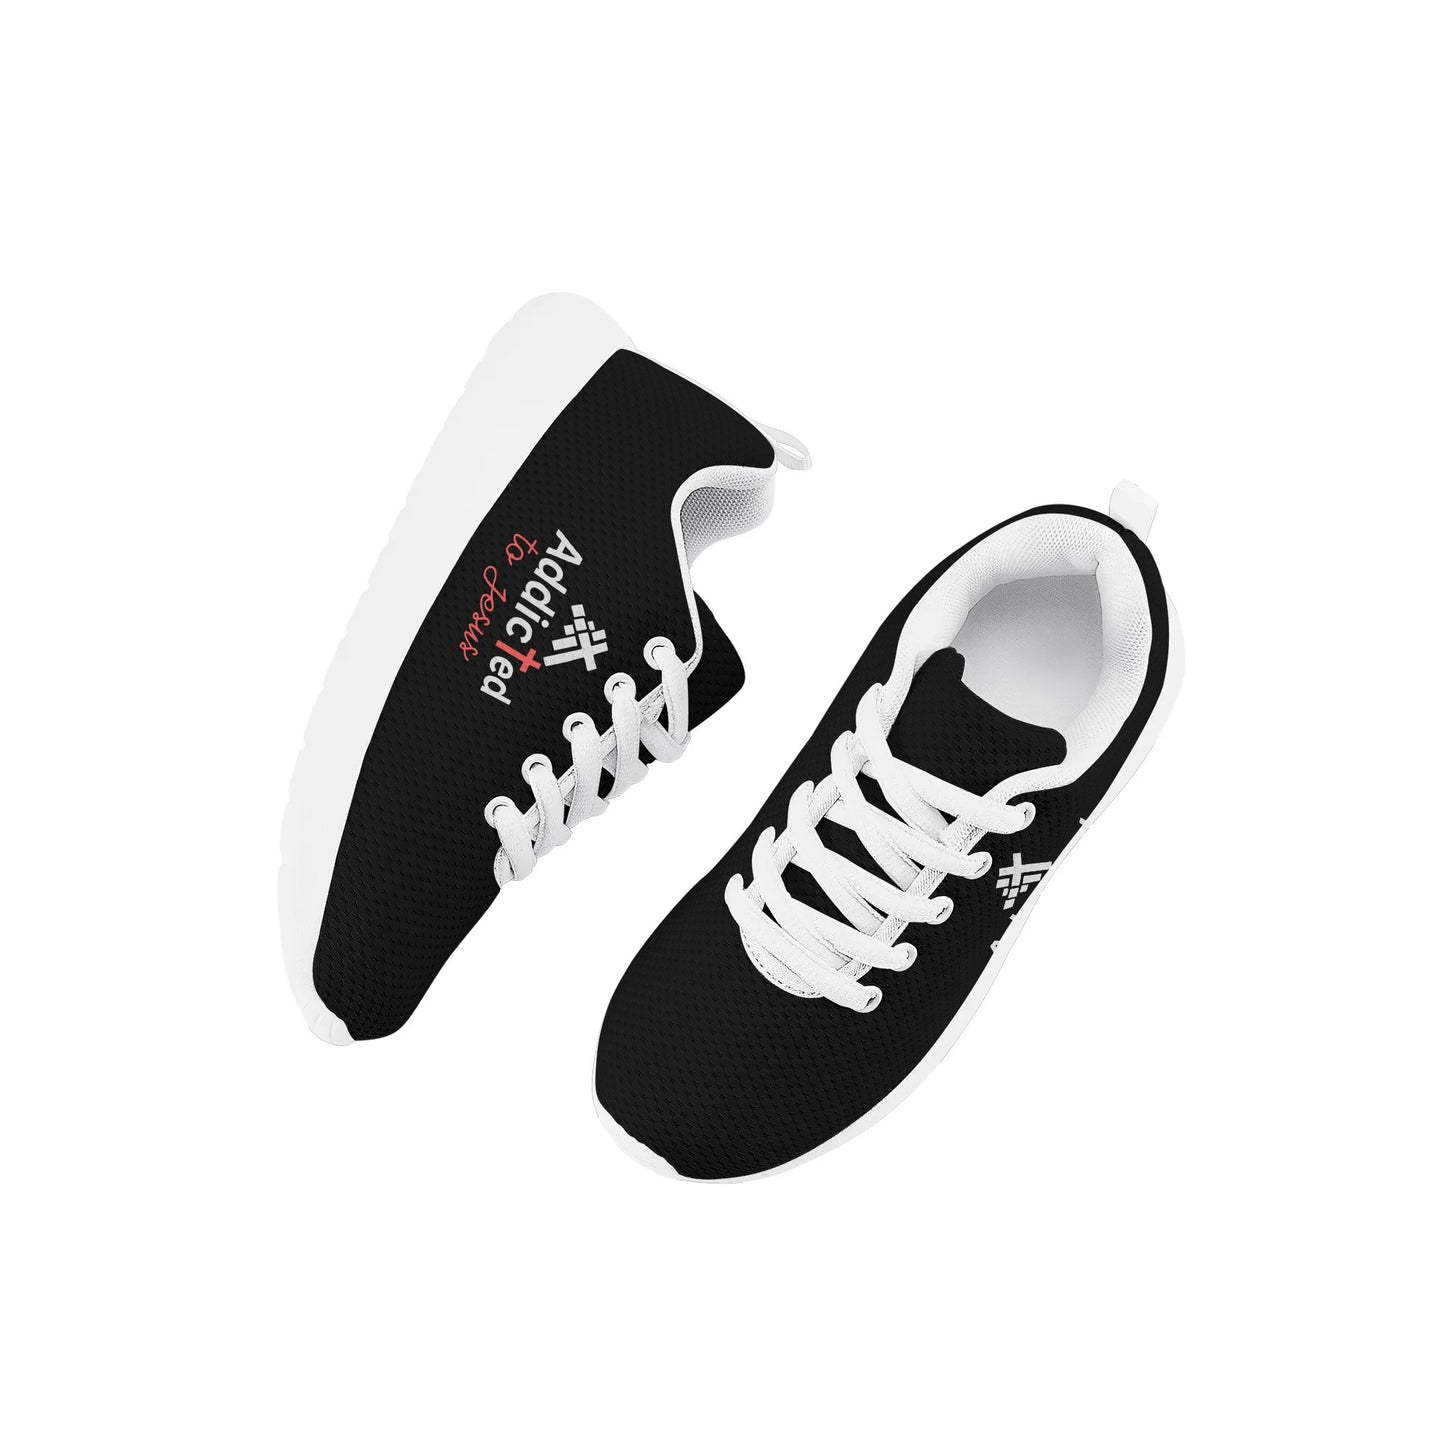 Addicted To Jesus Kids Lace-up Athletic Christian Sneakers popcustoms